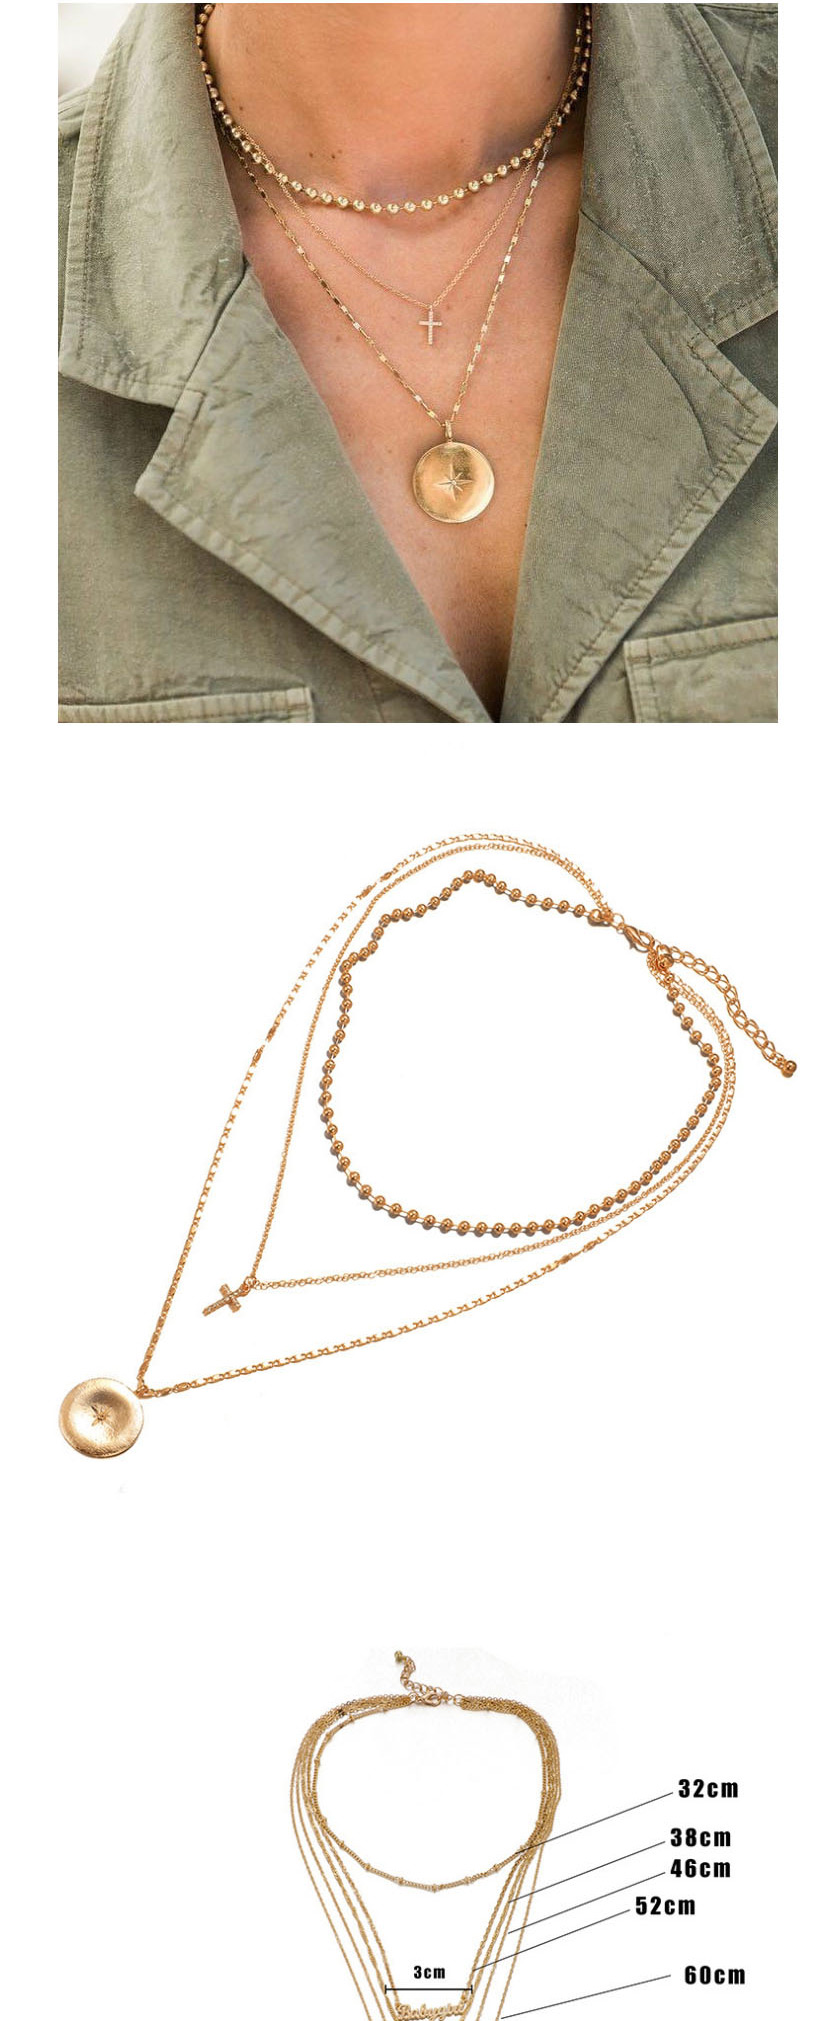 Fashion Golden Cross Moon Oval Portrait Multilayer Necklace,Multi Strand Necklaces